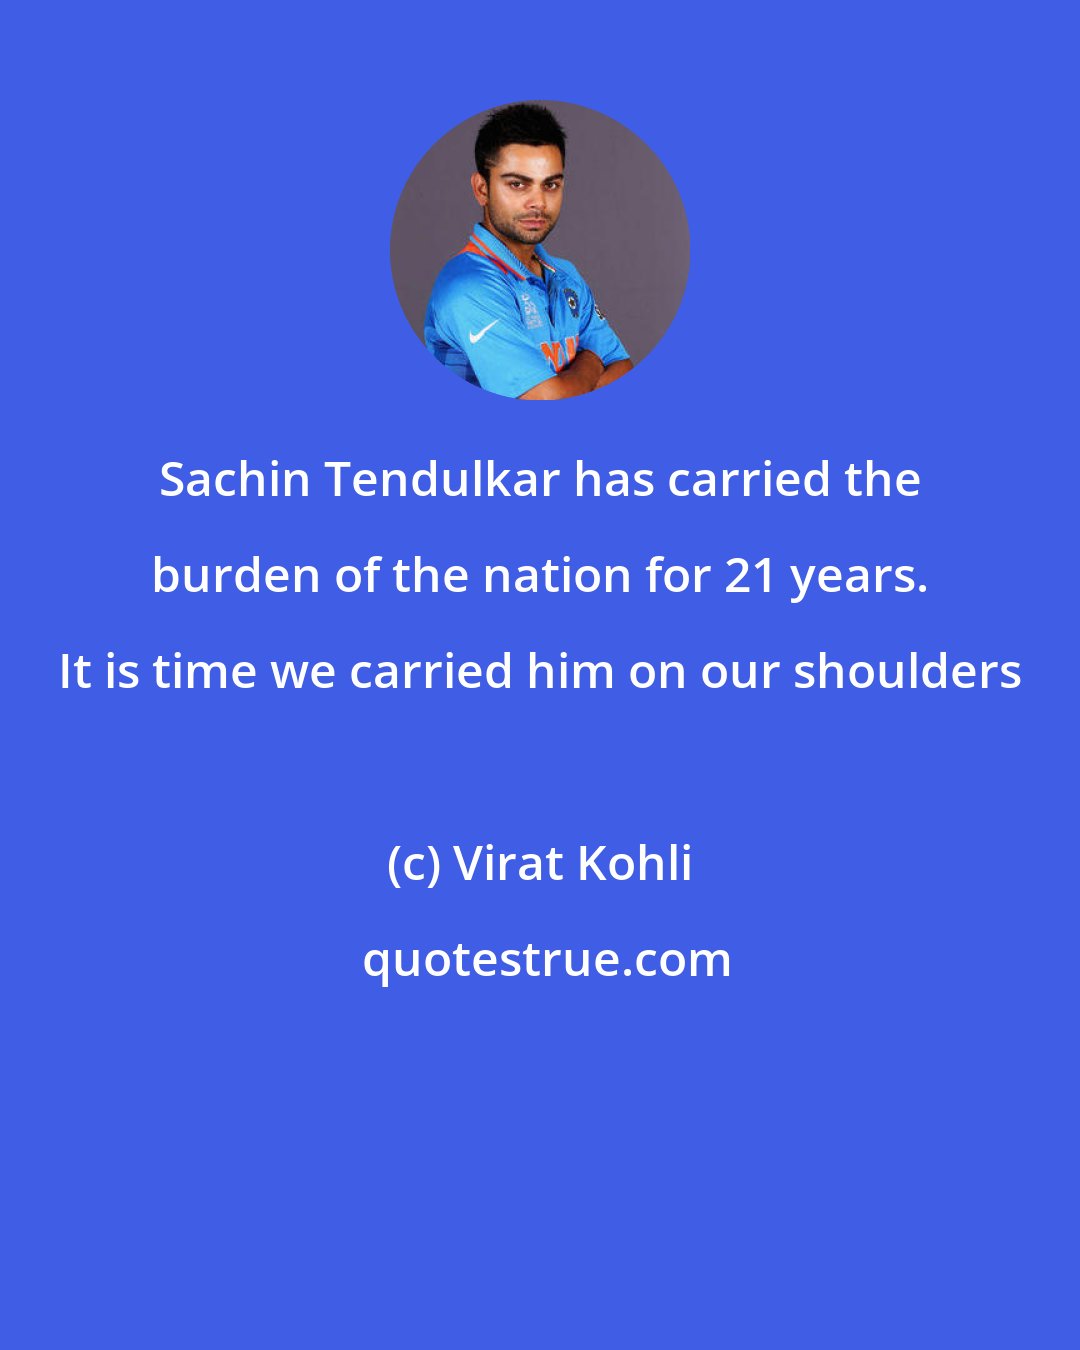 Virat Kohli: Sachin Tendulkar has carried the burden of the nation for 21 years. It is time we carried him on our shoulders